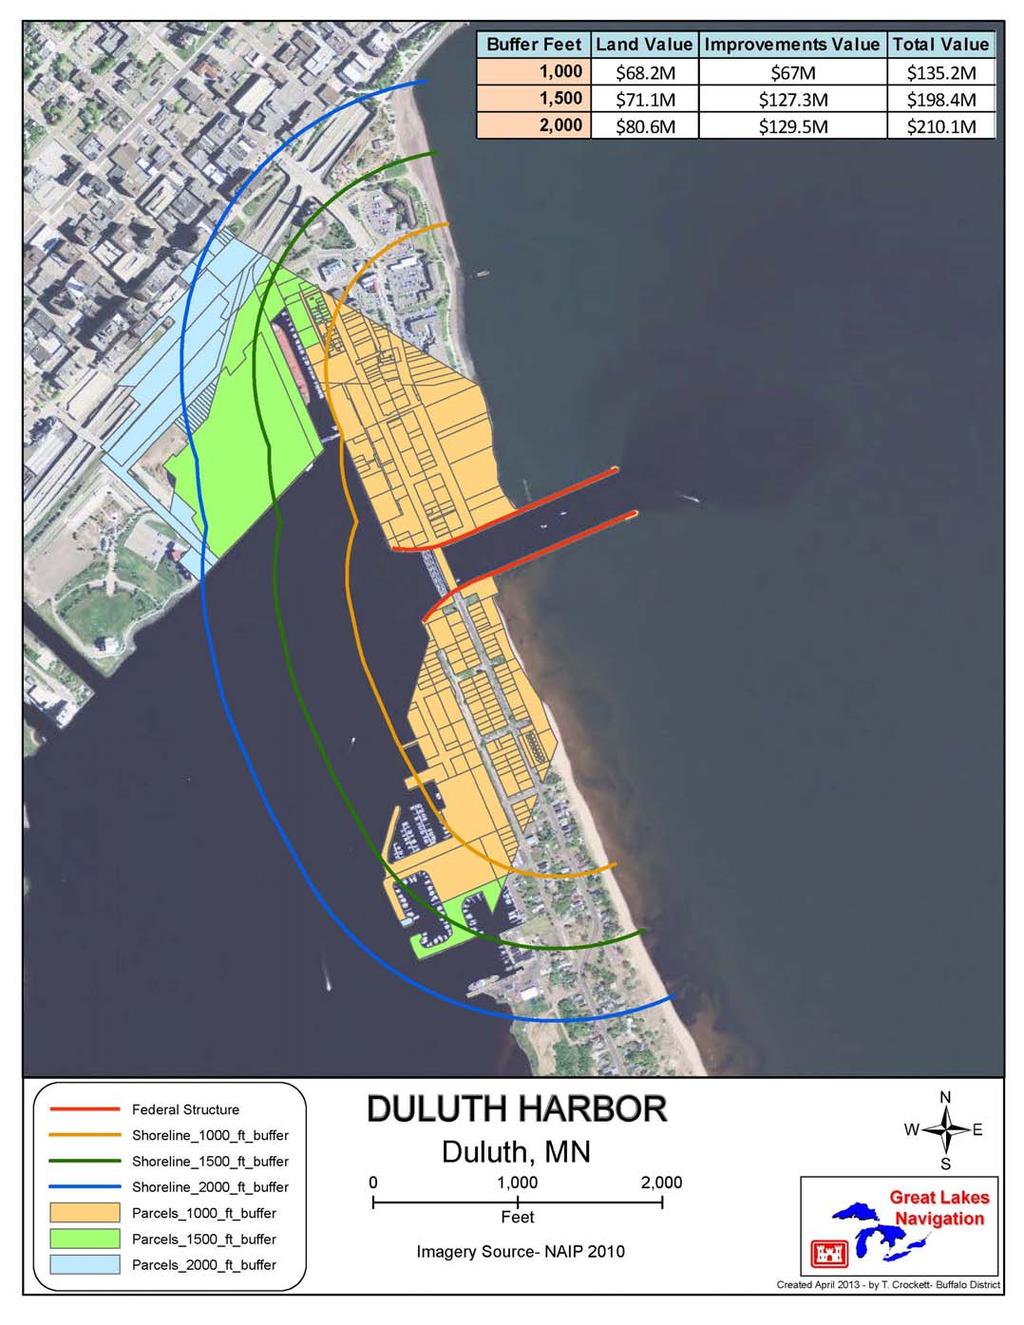 Potential Impact Area: The following graphic displays property parcels that could be impacted within various zones defined by different setbacks from the shoreline behind existing Federal coastal